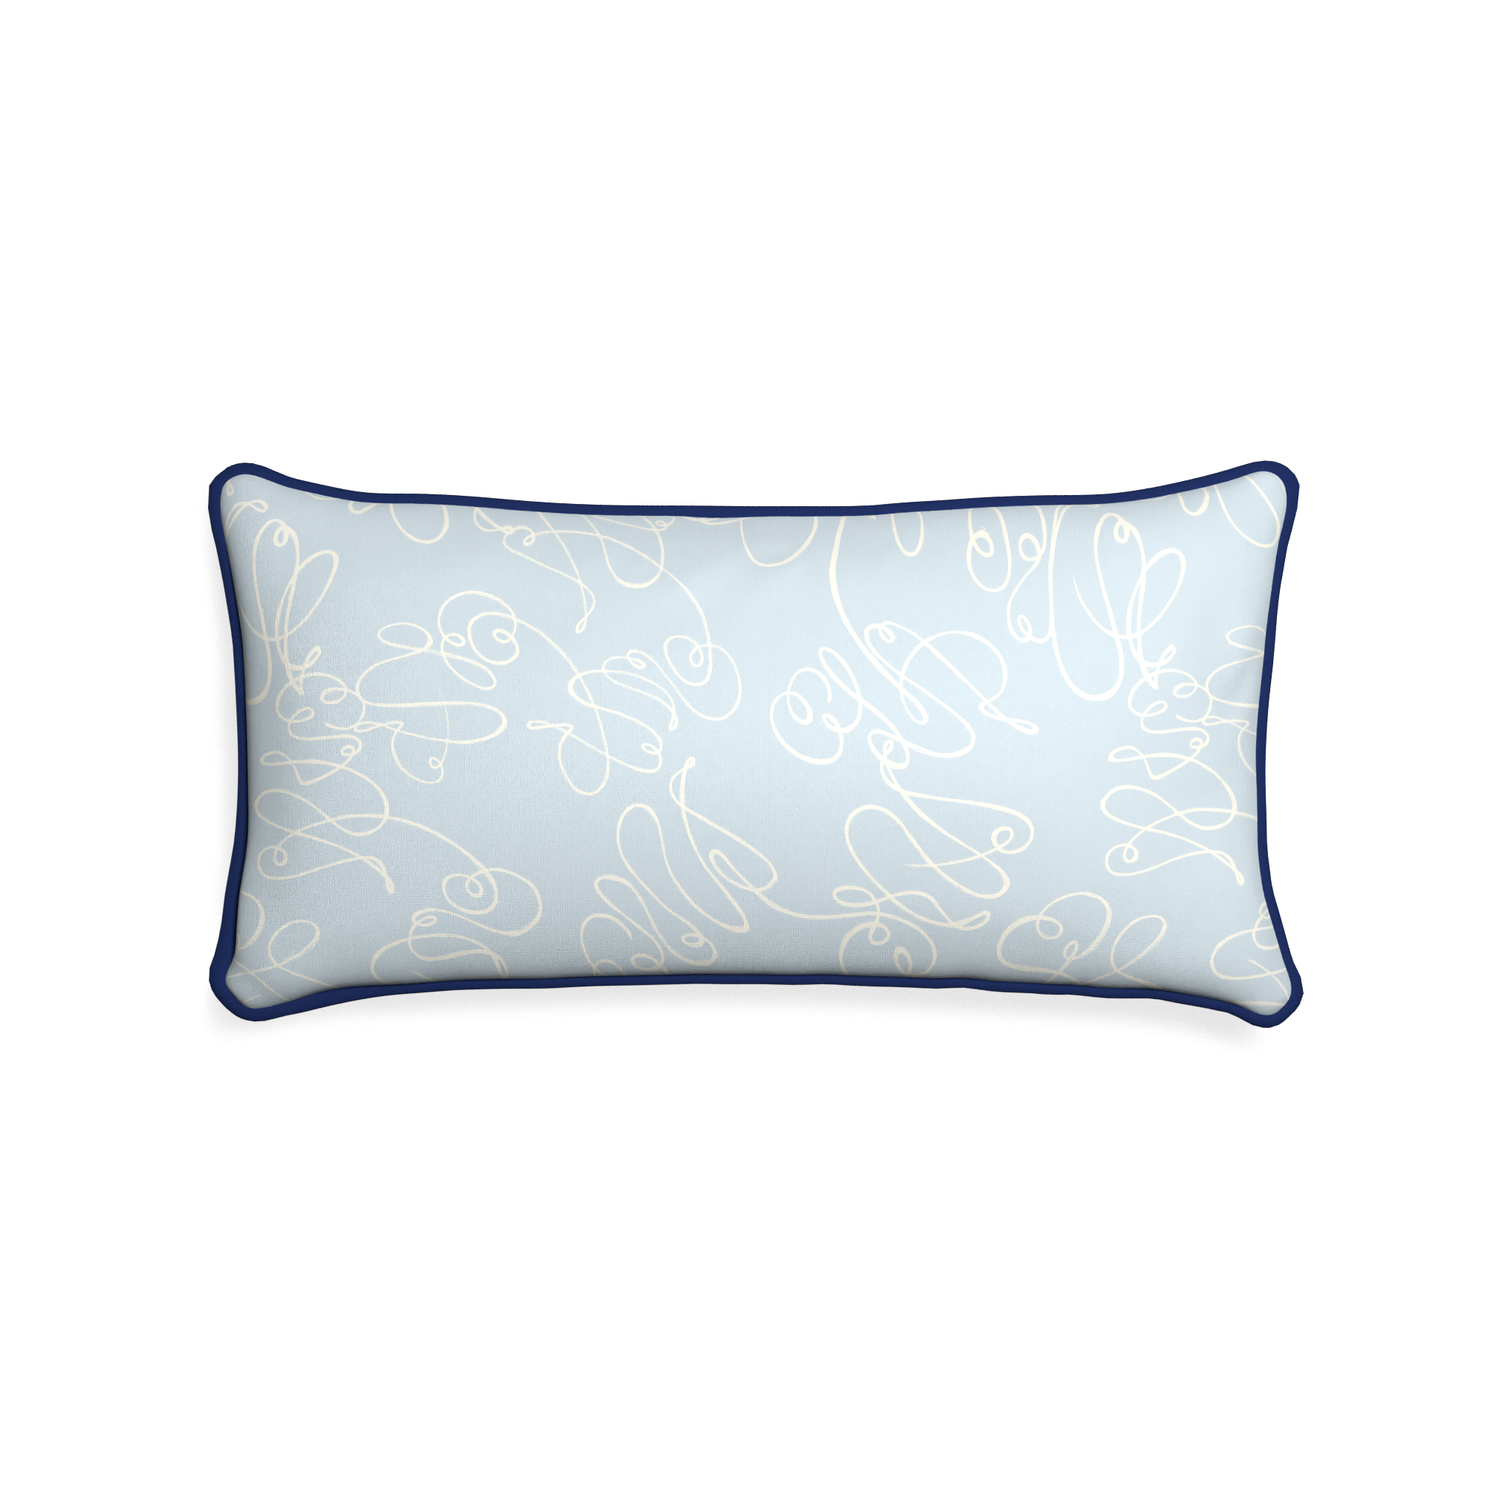 Midi-lumbar mirabella custom powder blue abstractpillow with midnight piping on white background